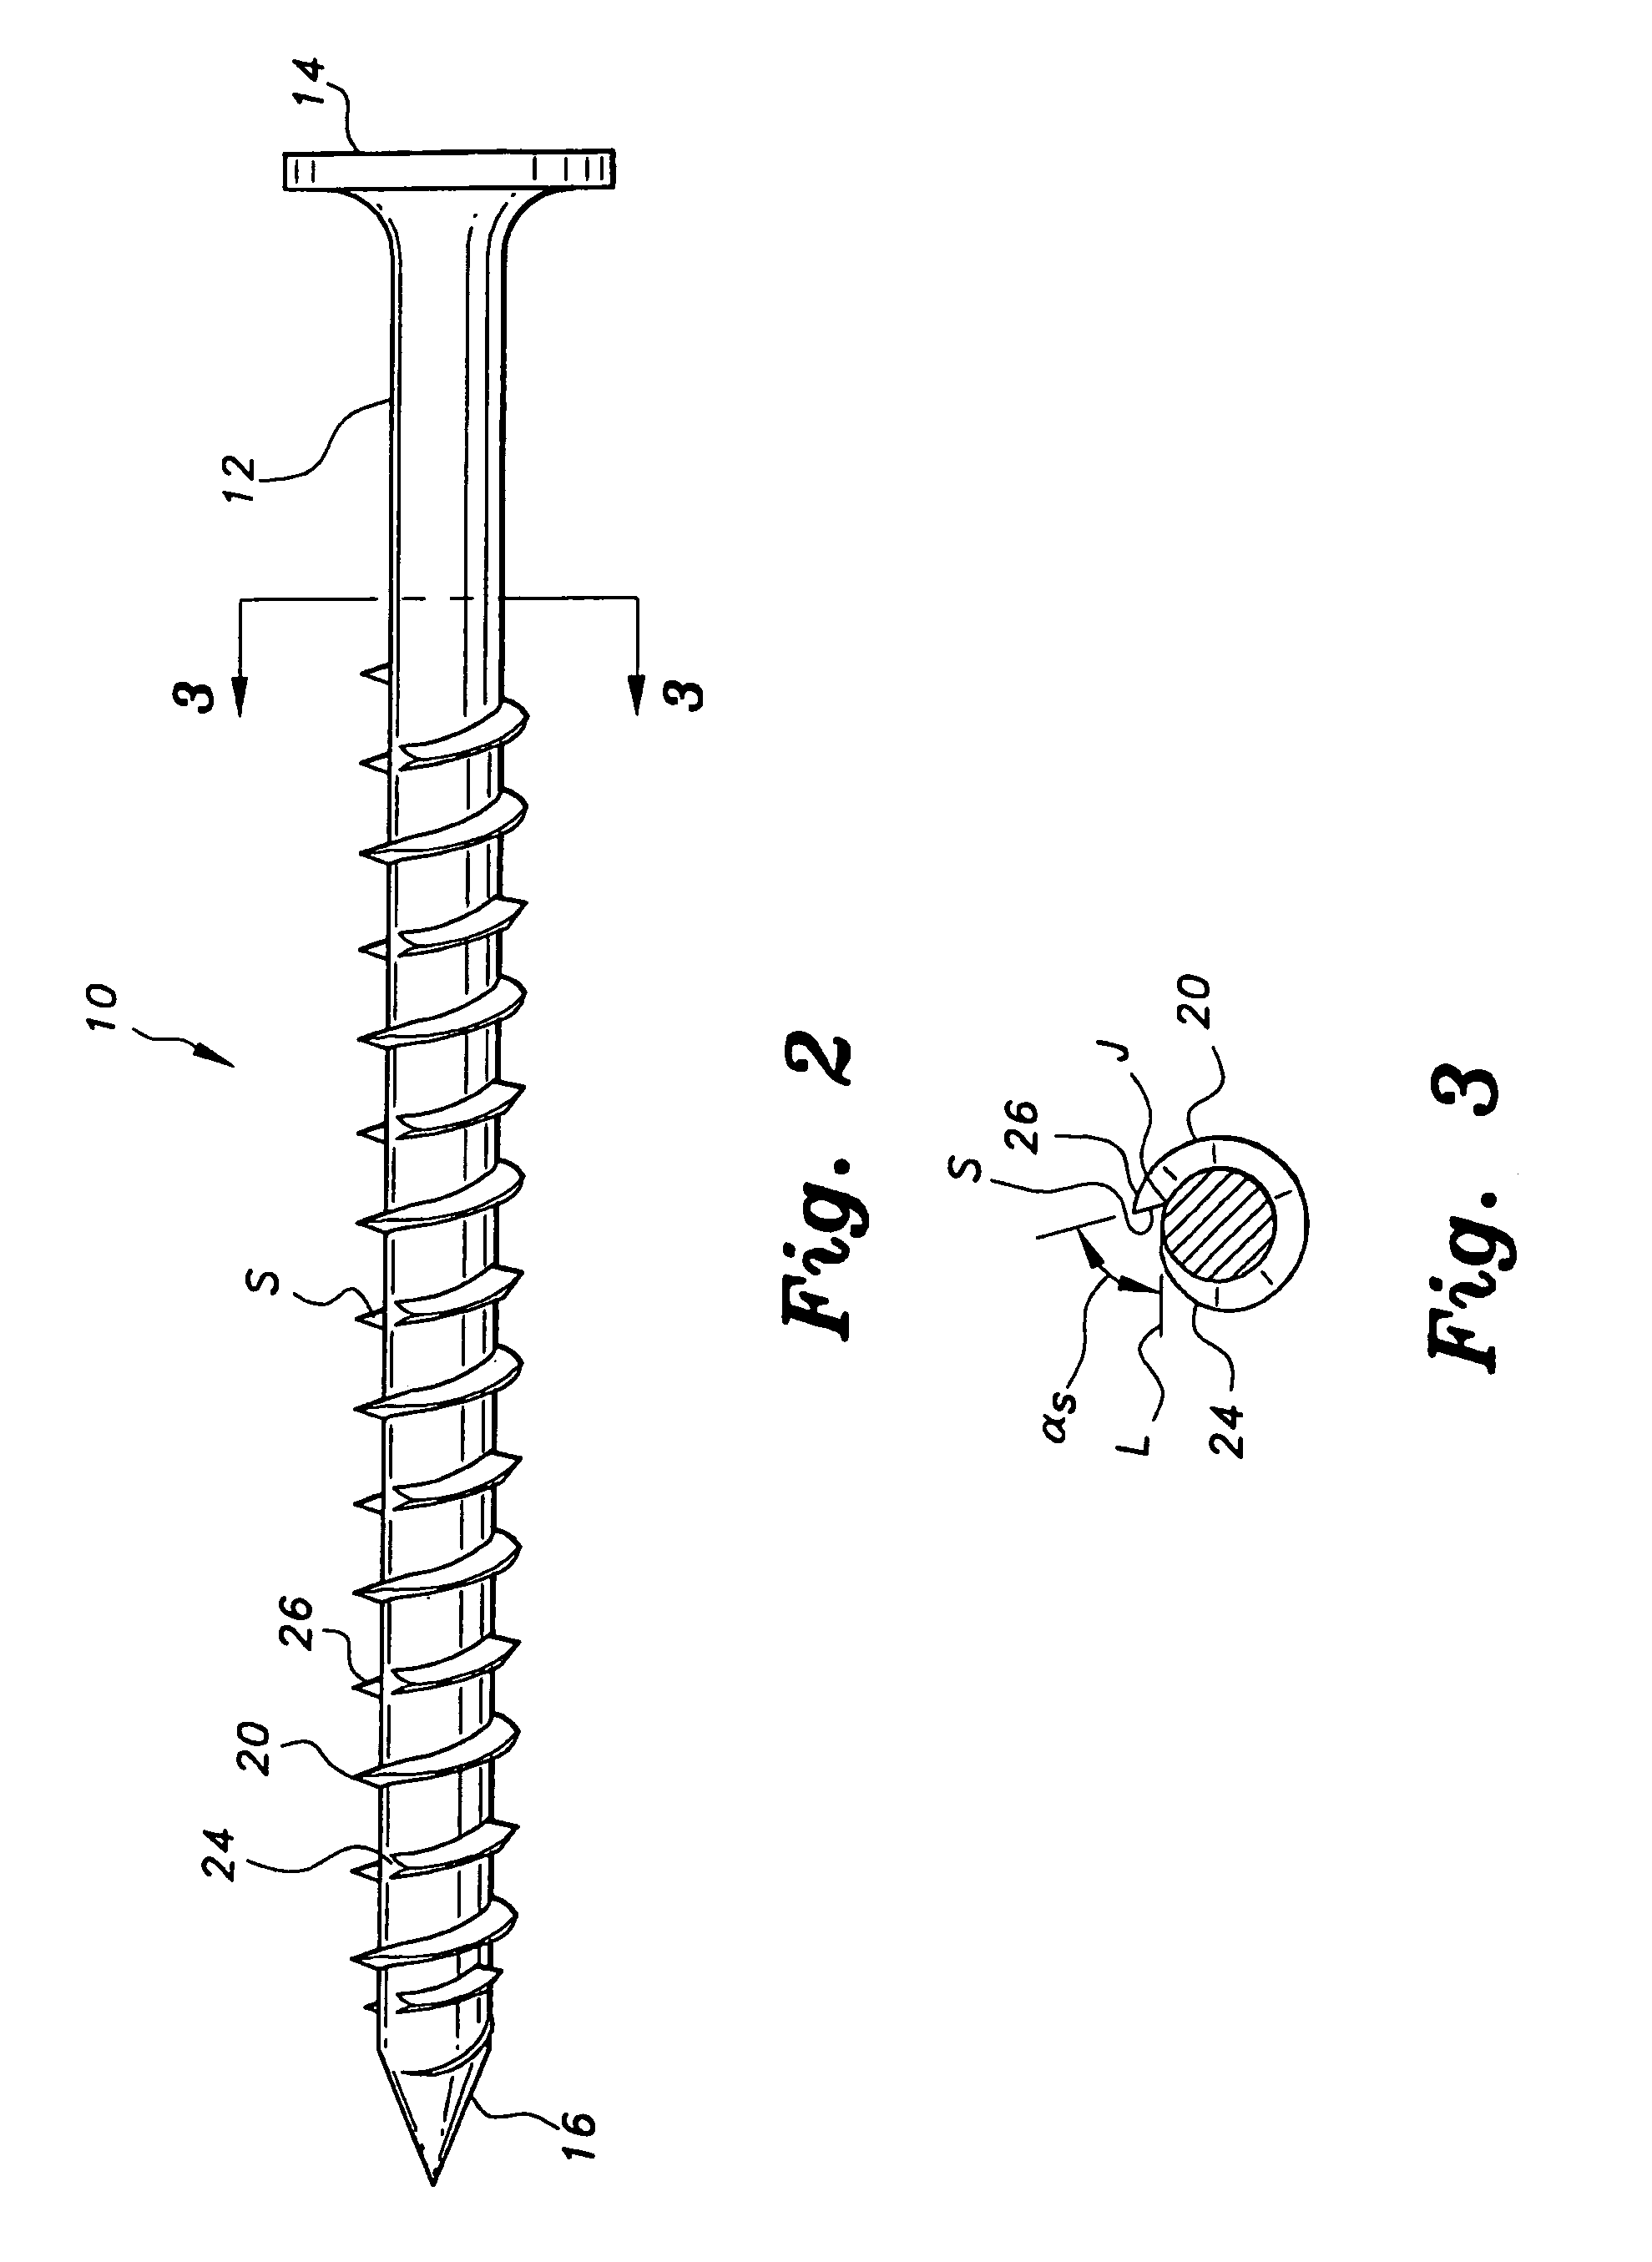 Reverse barb system for screws and nails